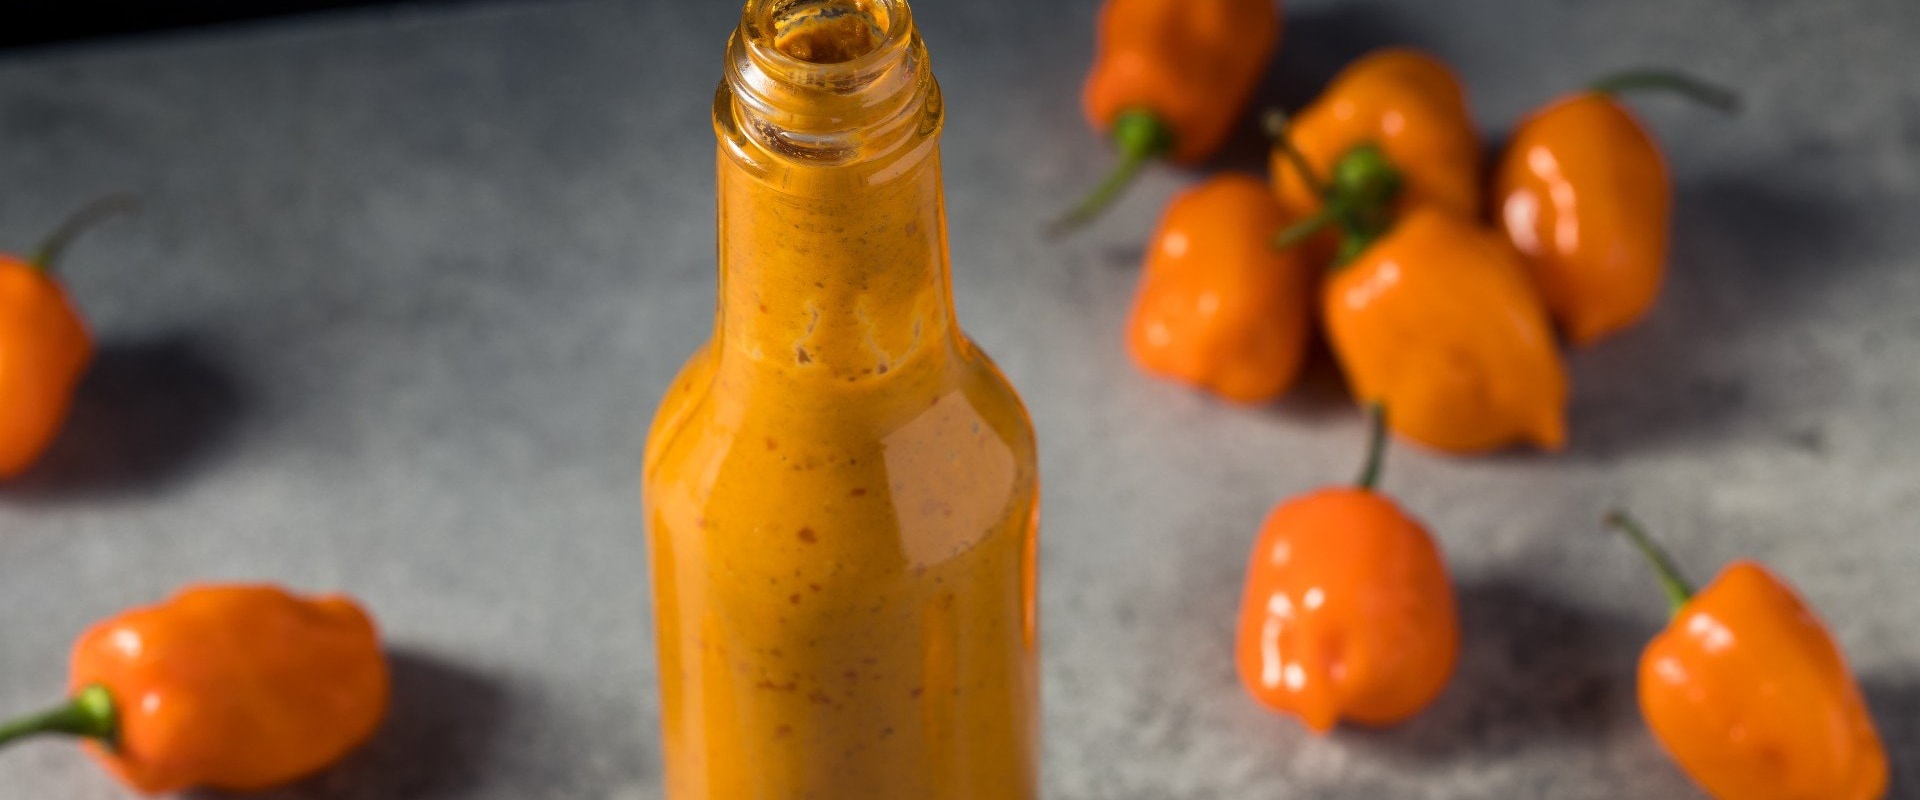 Habanero Chili Sauce: Everything You Need to Know